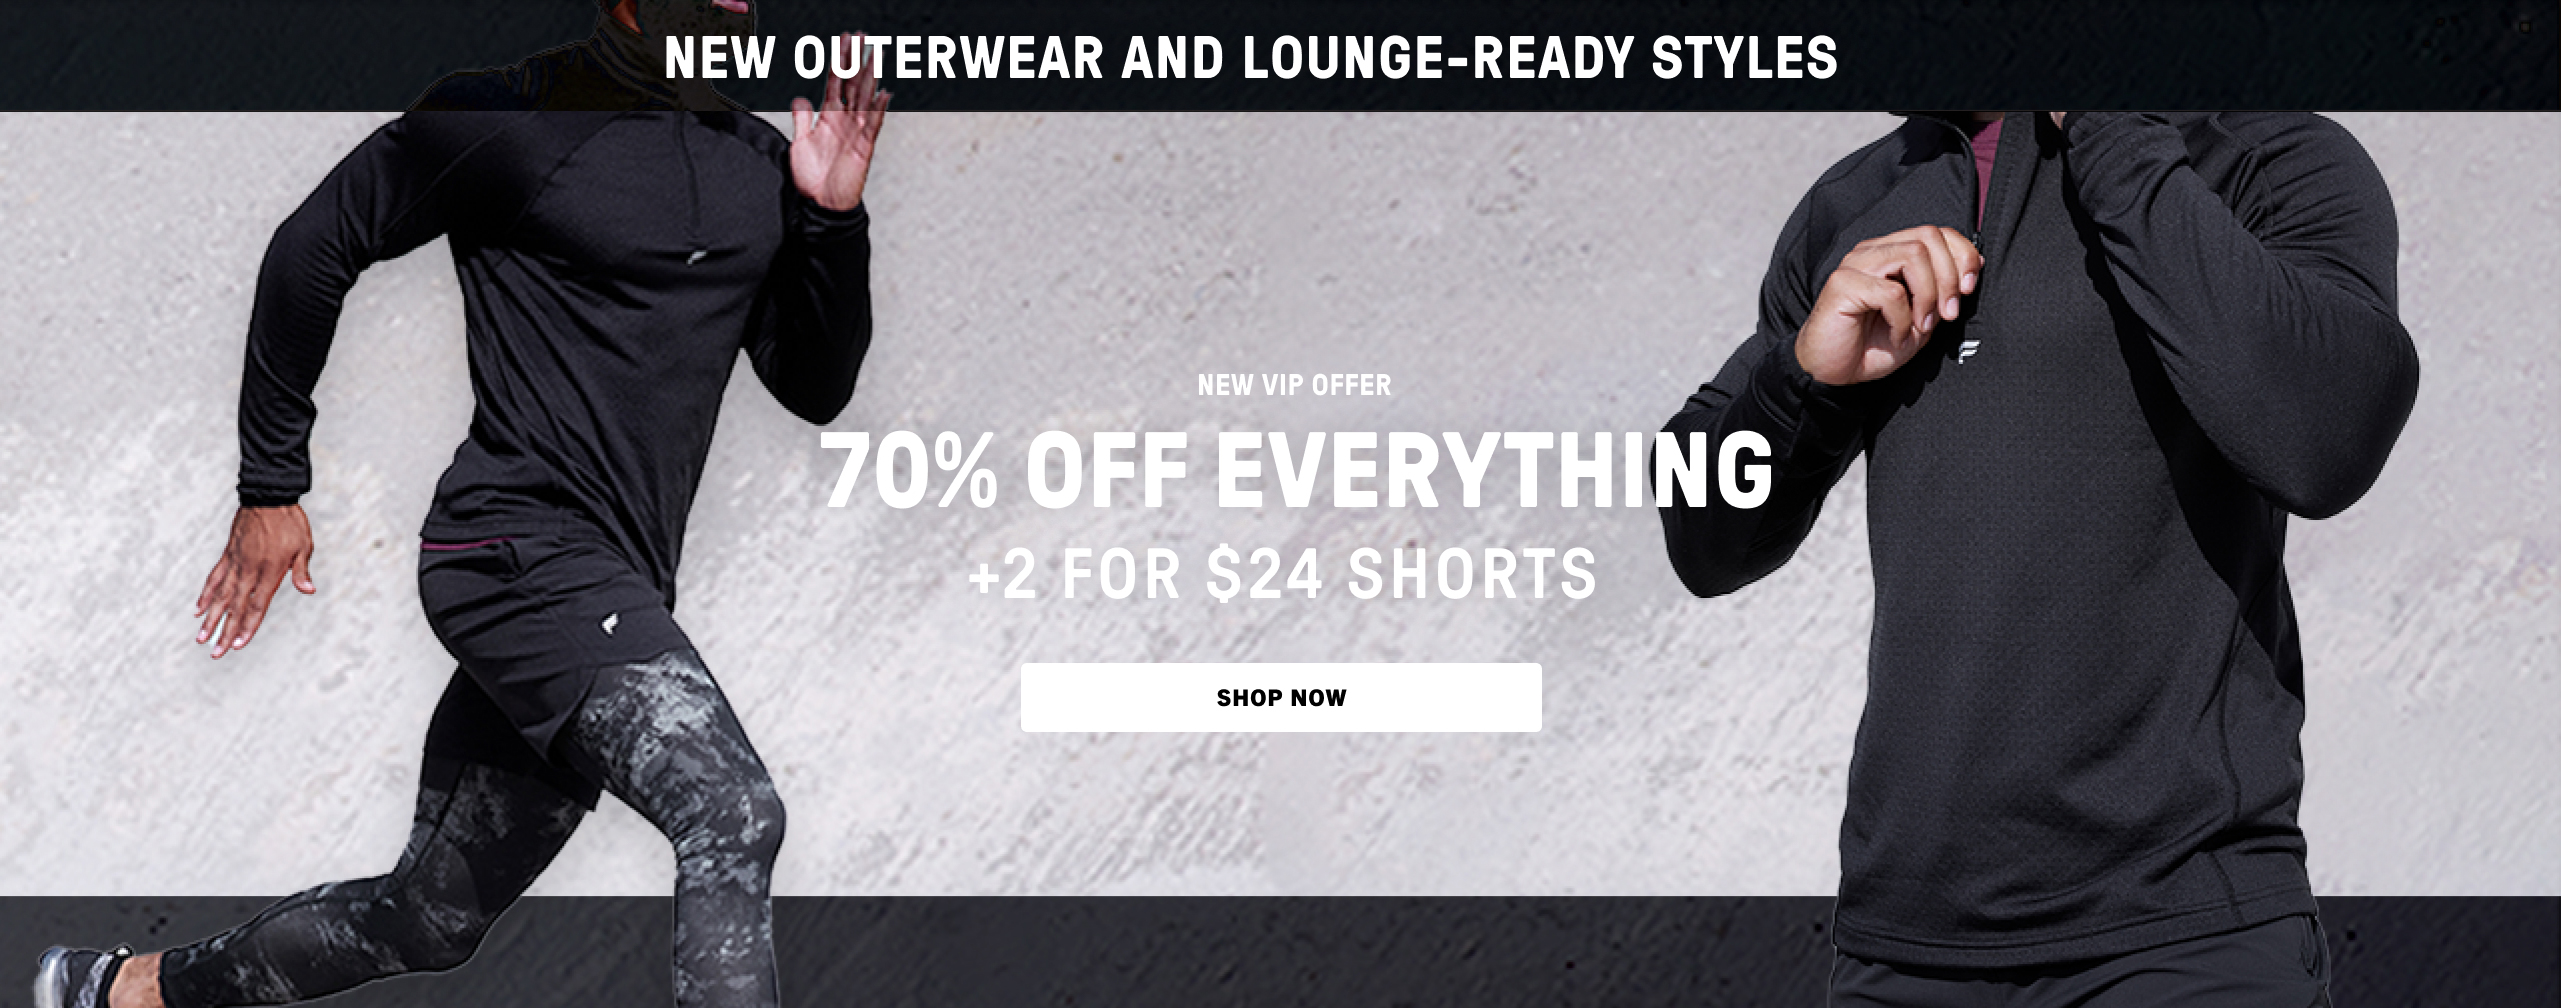 Click to unlock the New VIP offer and shop these new outerwear and lounge-ready styles.